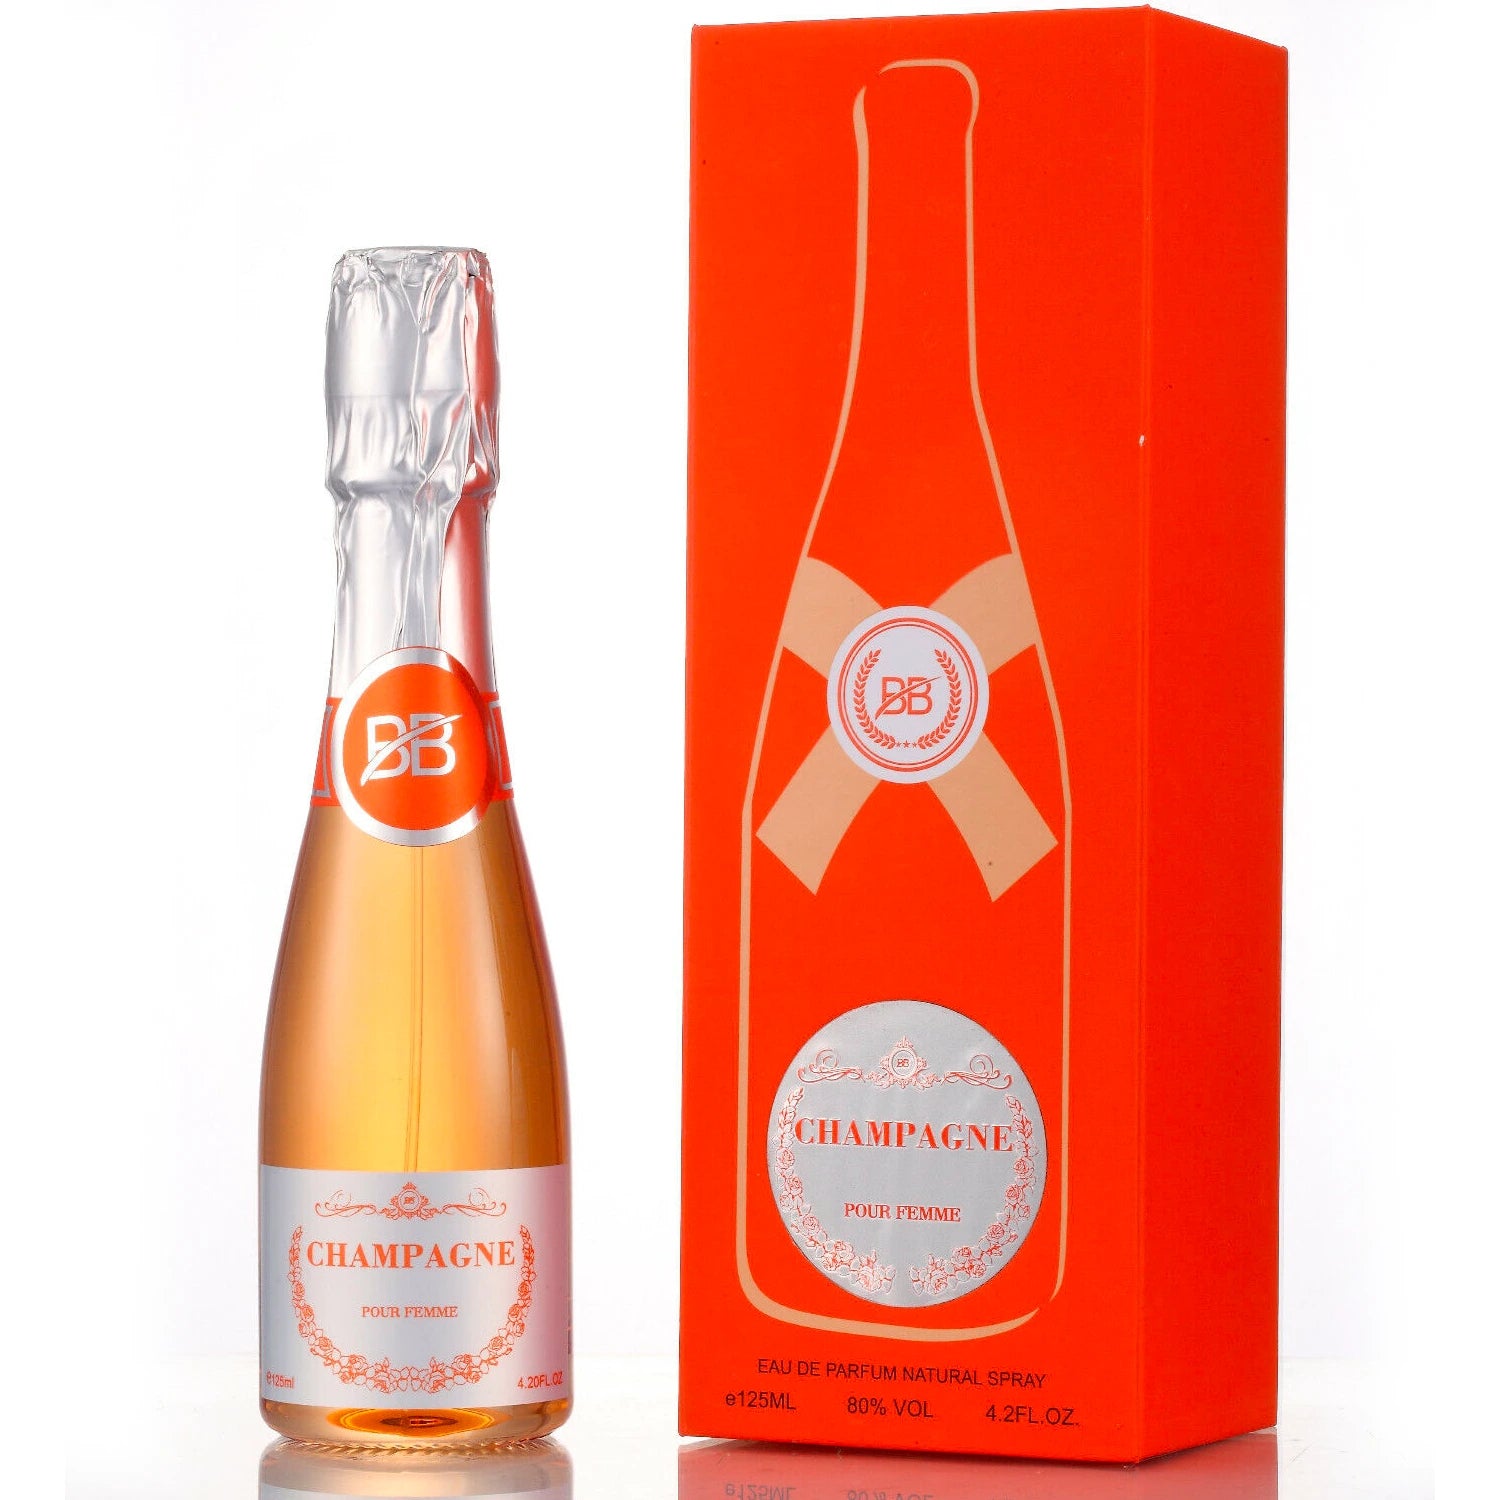 <meta charset="utf-8"><b>Champagne Pour Femme</b><span> by </span><b>Bharara</b><span> is a Floral fragrance for women. </span><b>Champagne Pour Femme</b><span> was launched in 2022. Top notes are Black Currant and Pear; middle notes are Lily, Jasmine and Orange Blossom; base notes are Patchouli, Tonka Bean, Vanilla and Praline.</span>